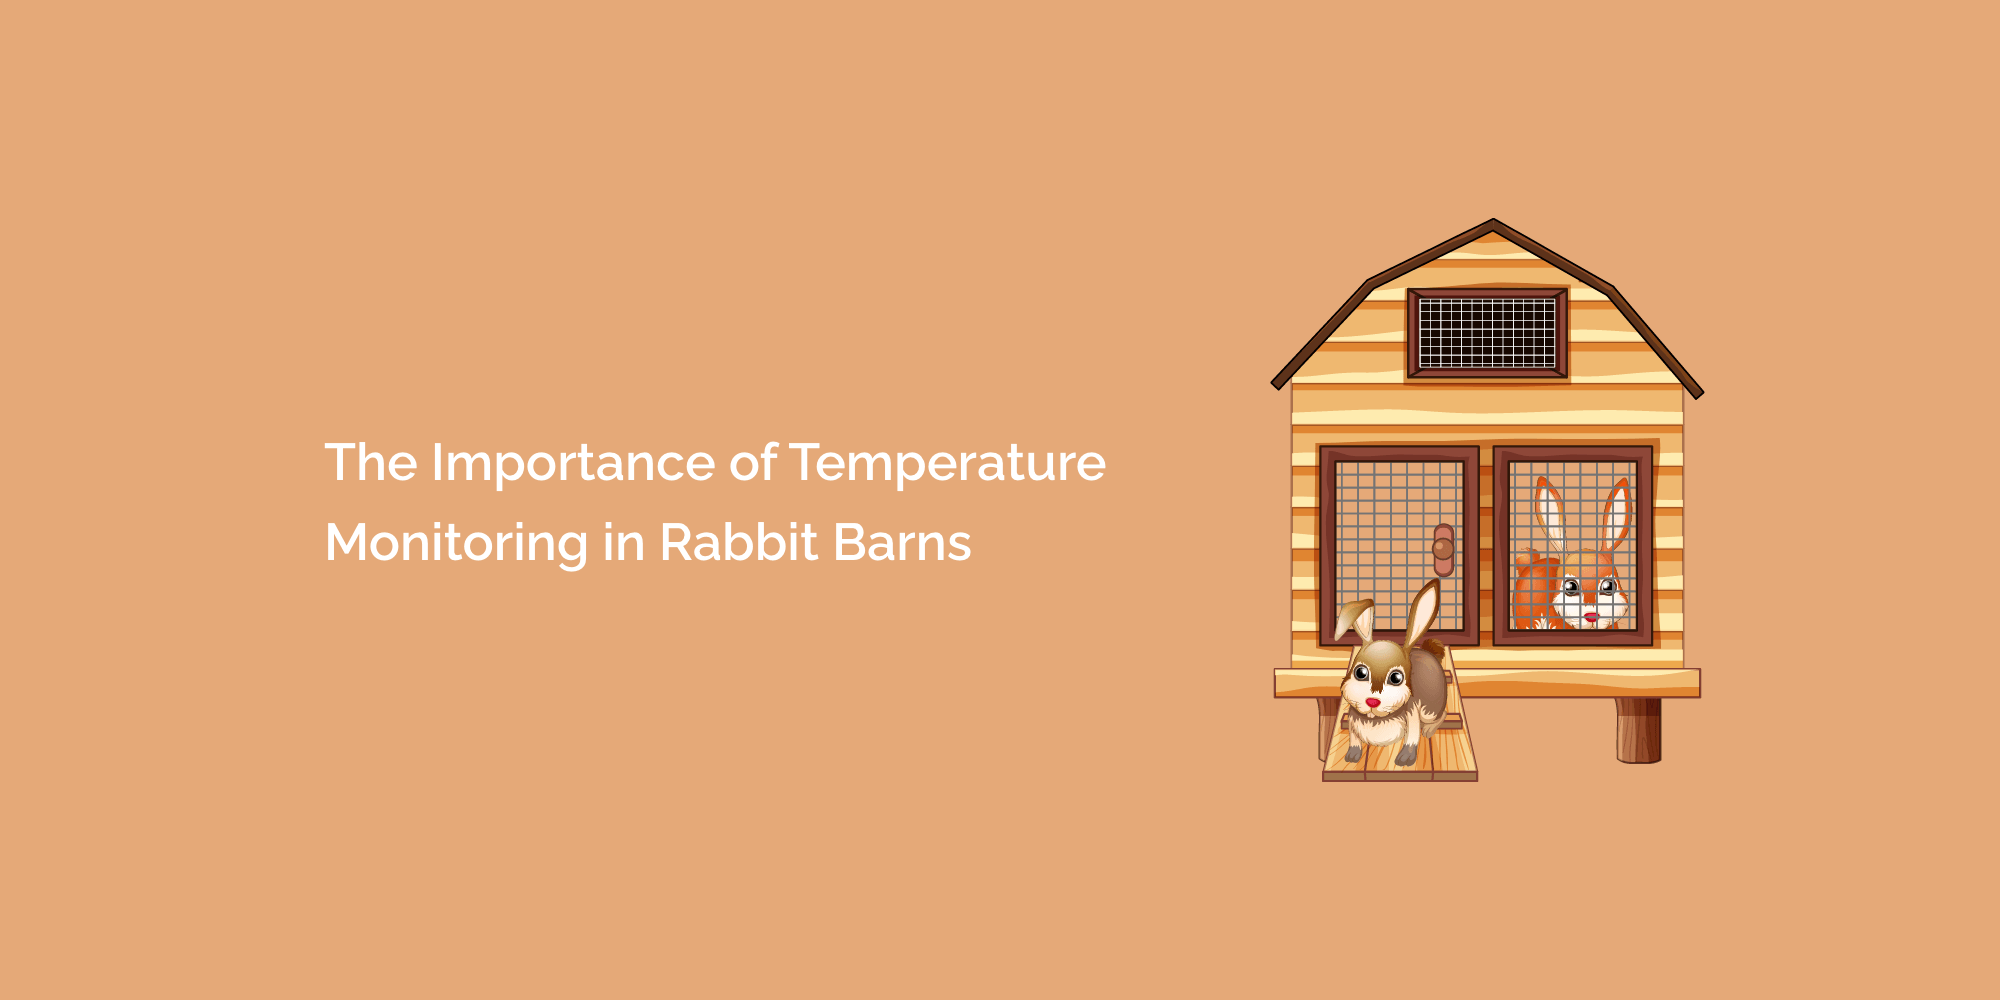 The Importance of Temperature Monitoring in Rabbit Barns